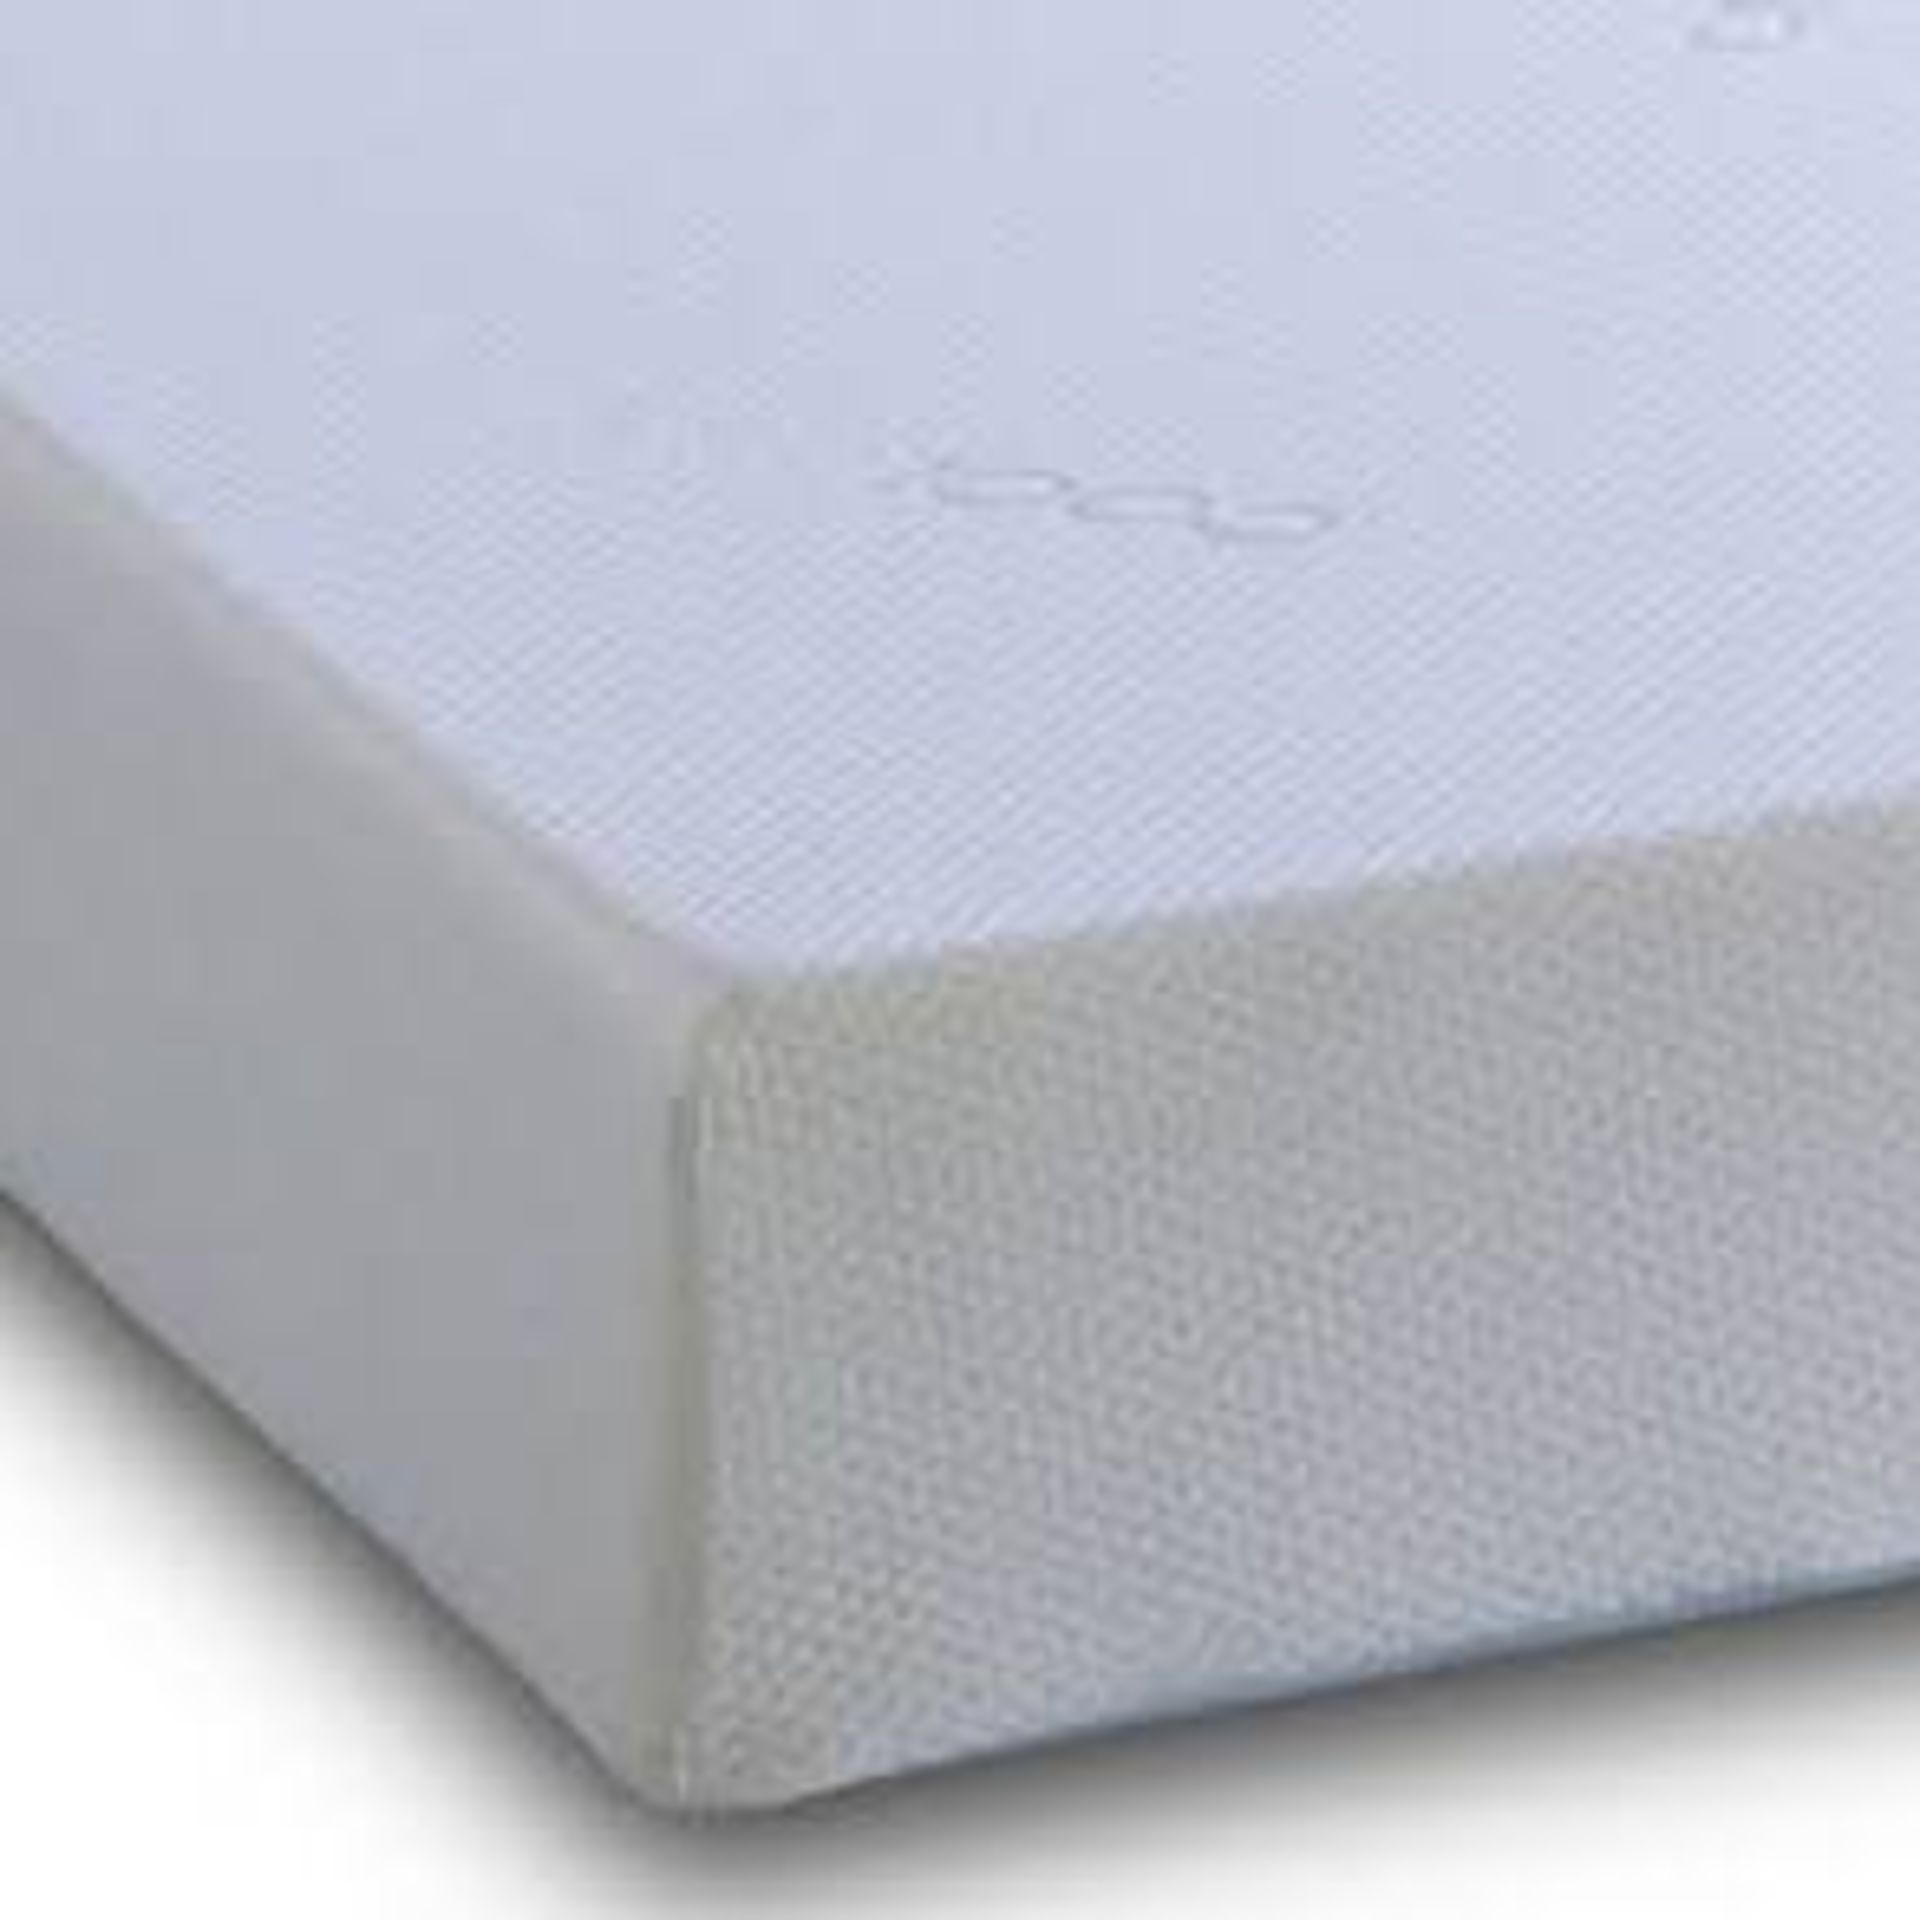 1 GRADE A 3FT SINGLE GILTEDGE BEDS MEMORY FOAM 250 MATTRESS / RRP £209.00 (VIEWING HIGHLY